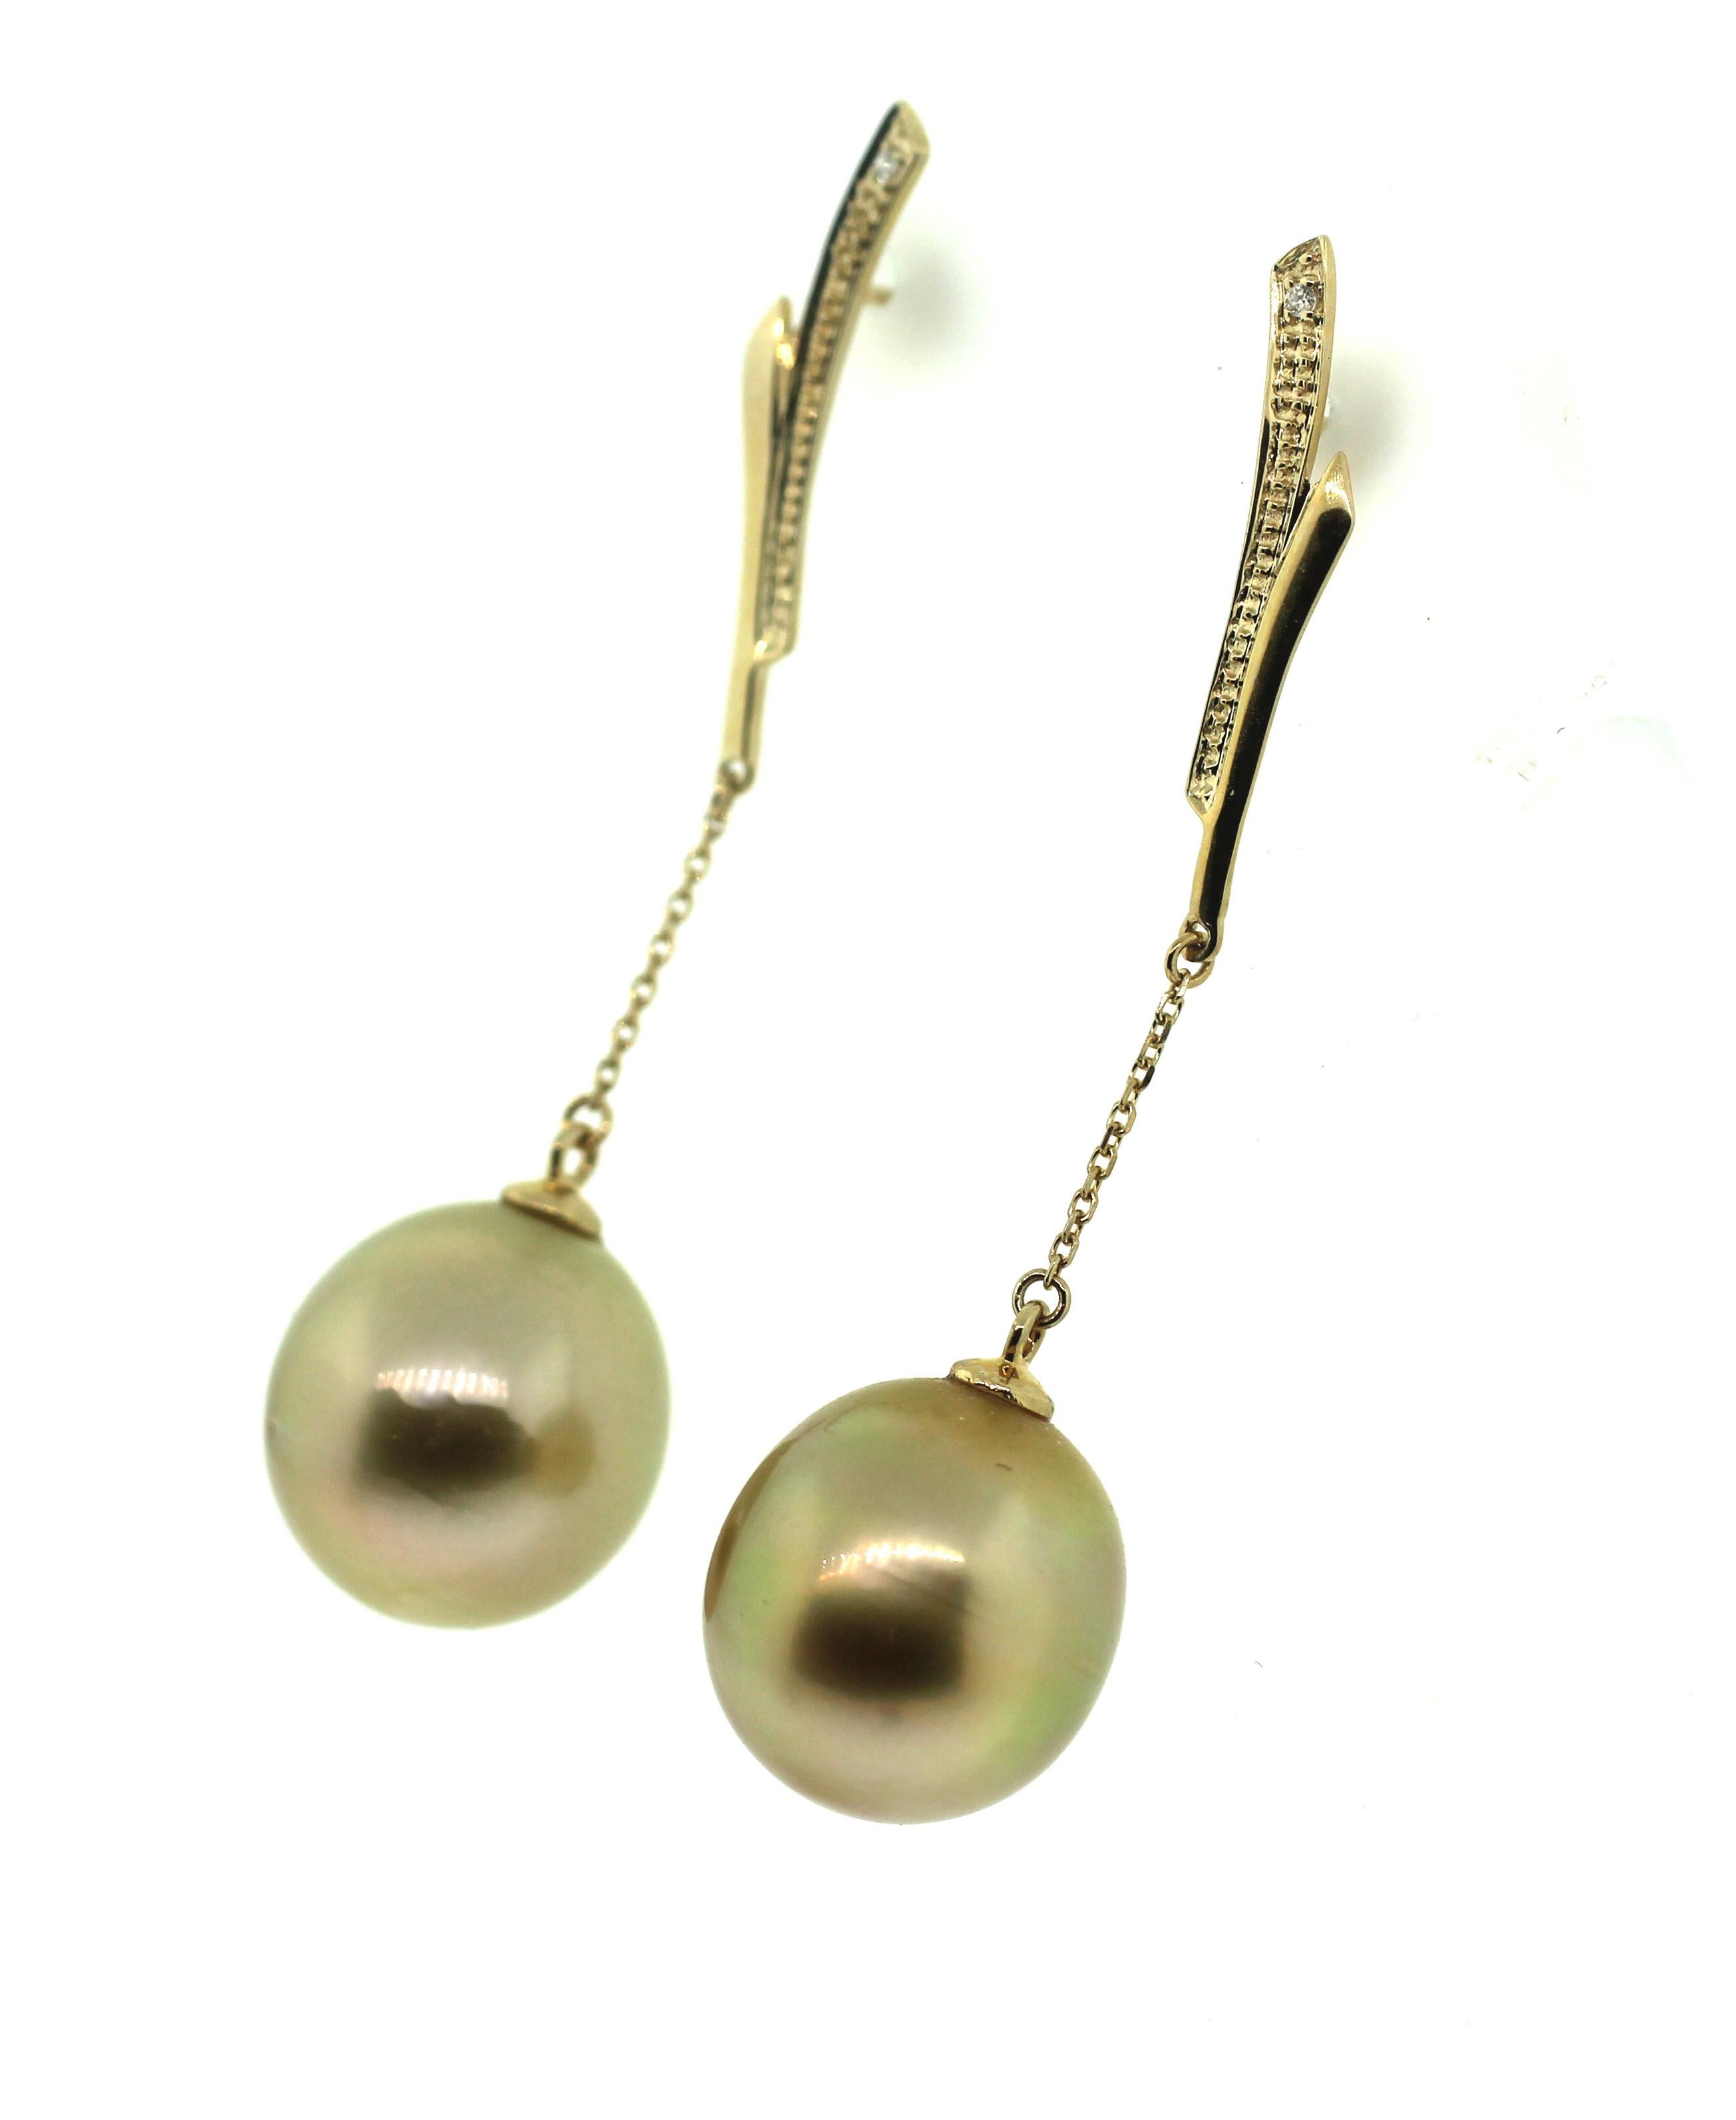 Hakimoto By Jewel Of Ocean
18K Yellow Gold and Diamond 
Golden Natural Color South Sea Cultured Pearl Earrings.
Total item weight 7.2 grams
Featuring Round Brilliant Diamonds
12-13mm Deep Golden color South Sea Cultured Pearls
18K Yellow Gold High